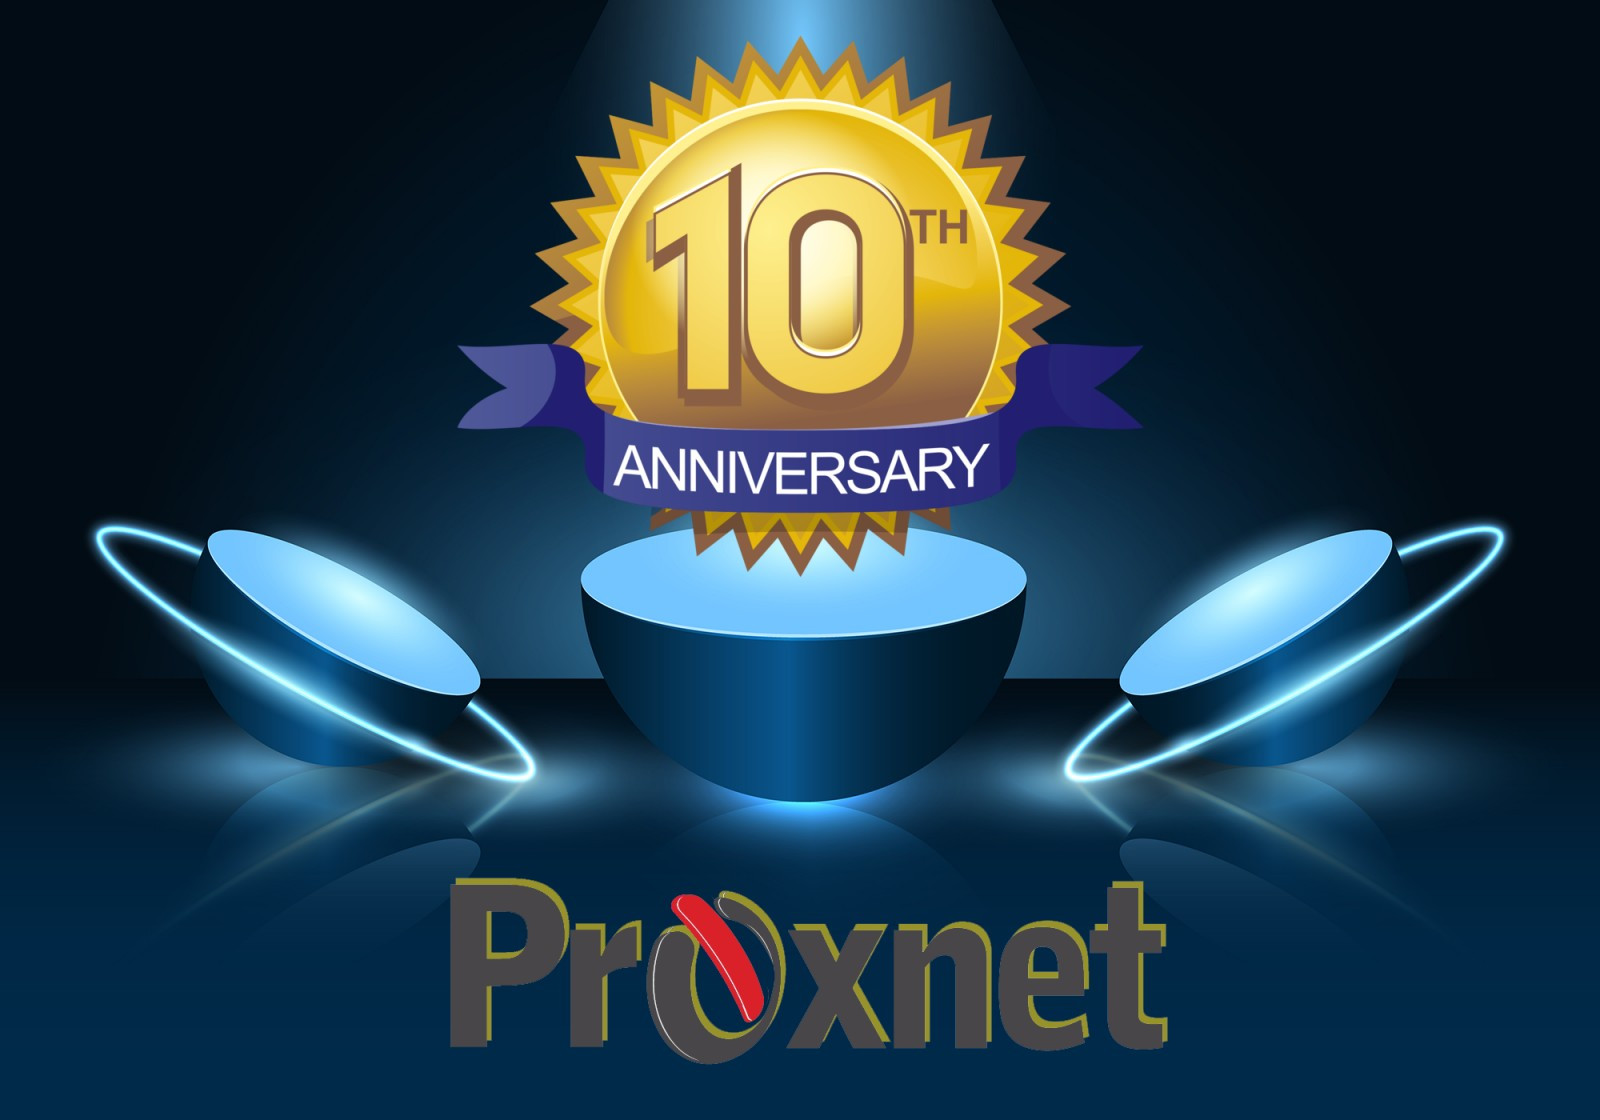 We are celebrating 10 years